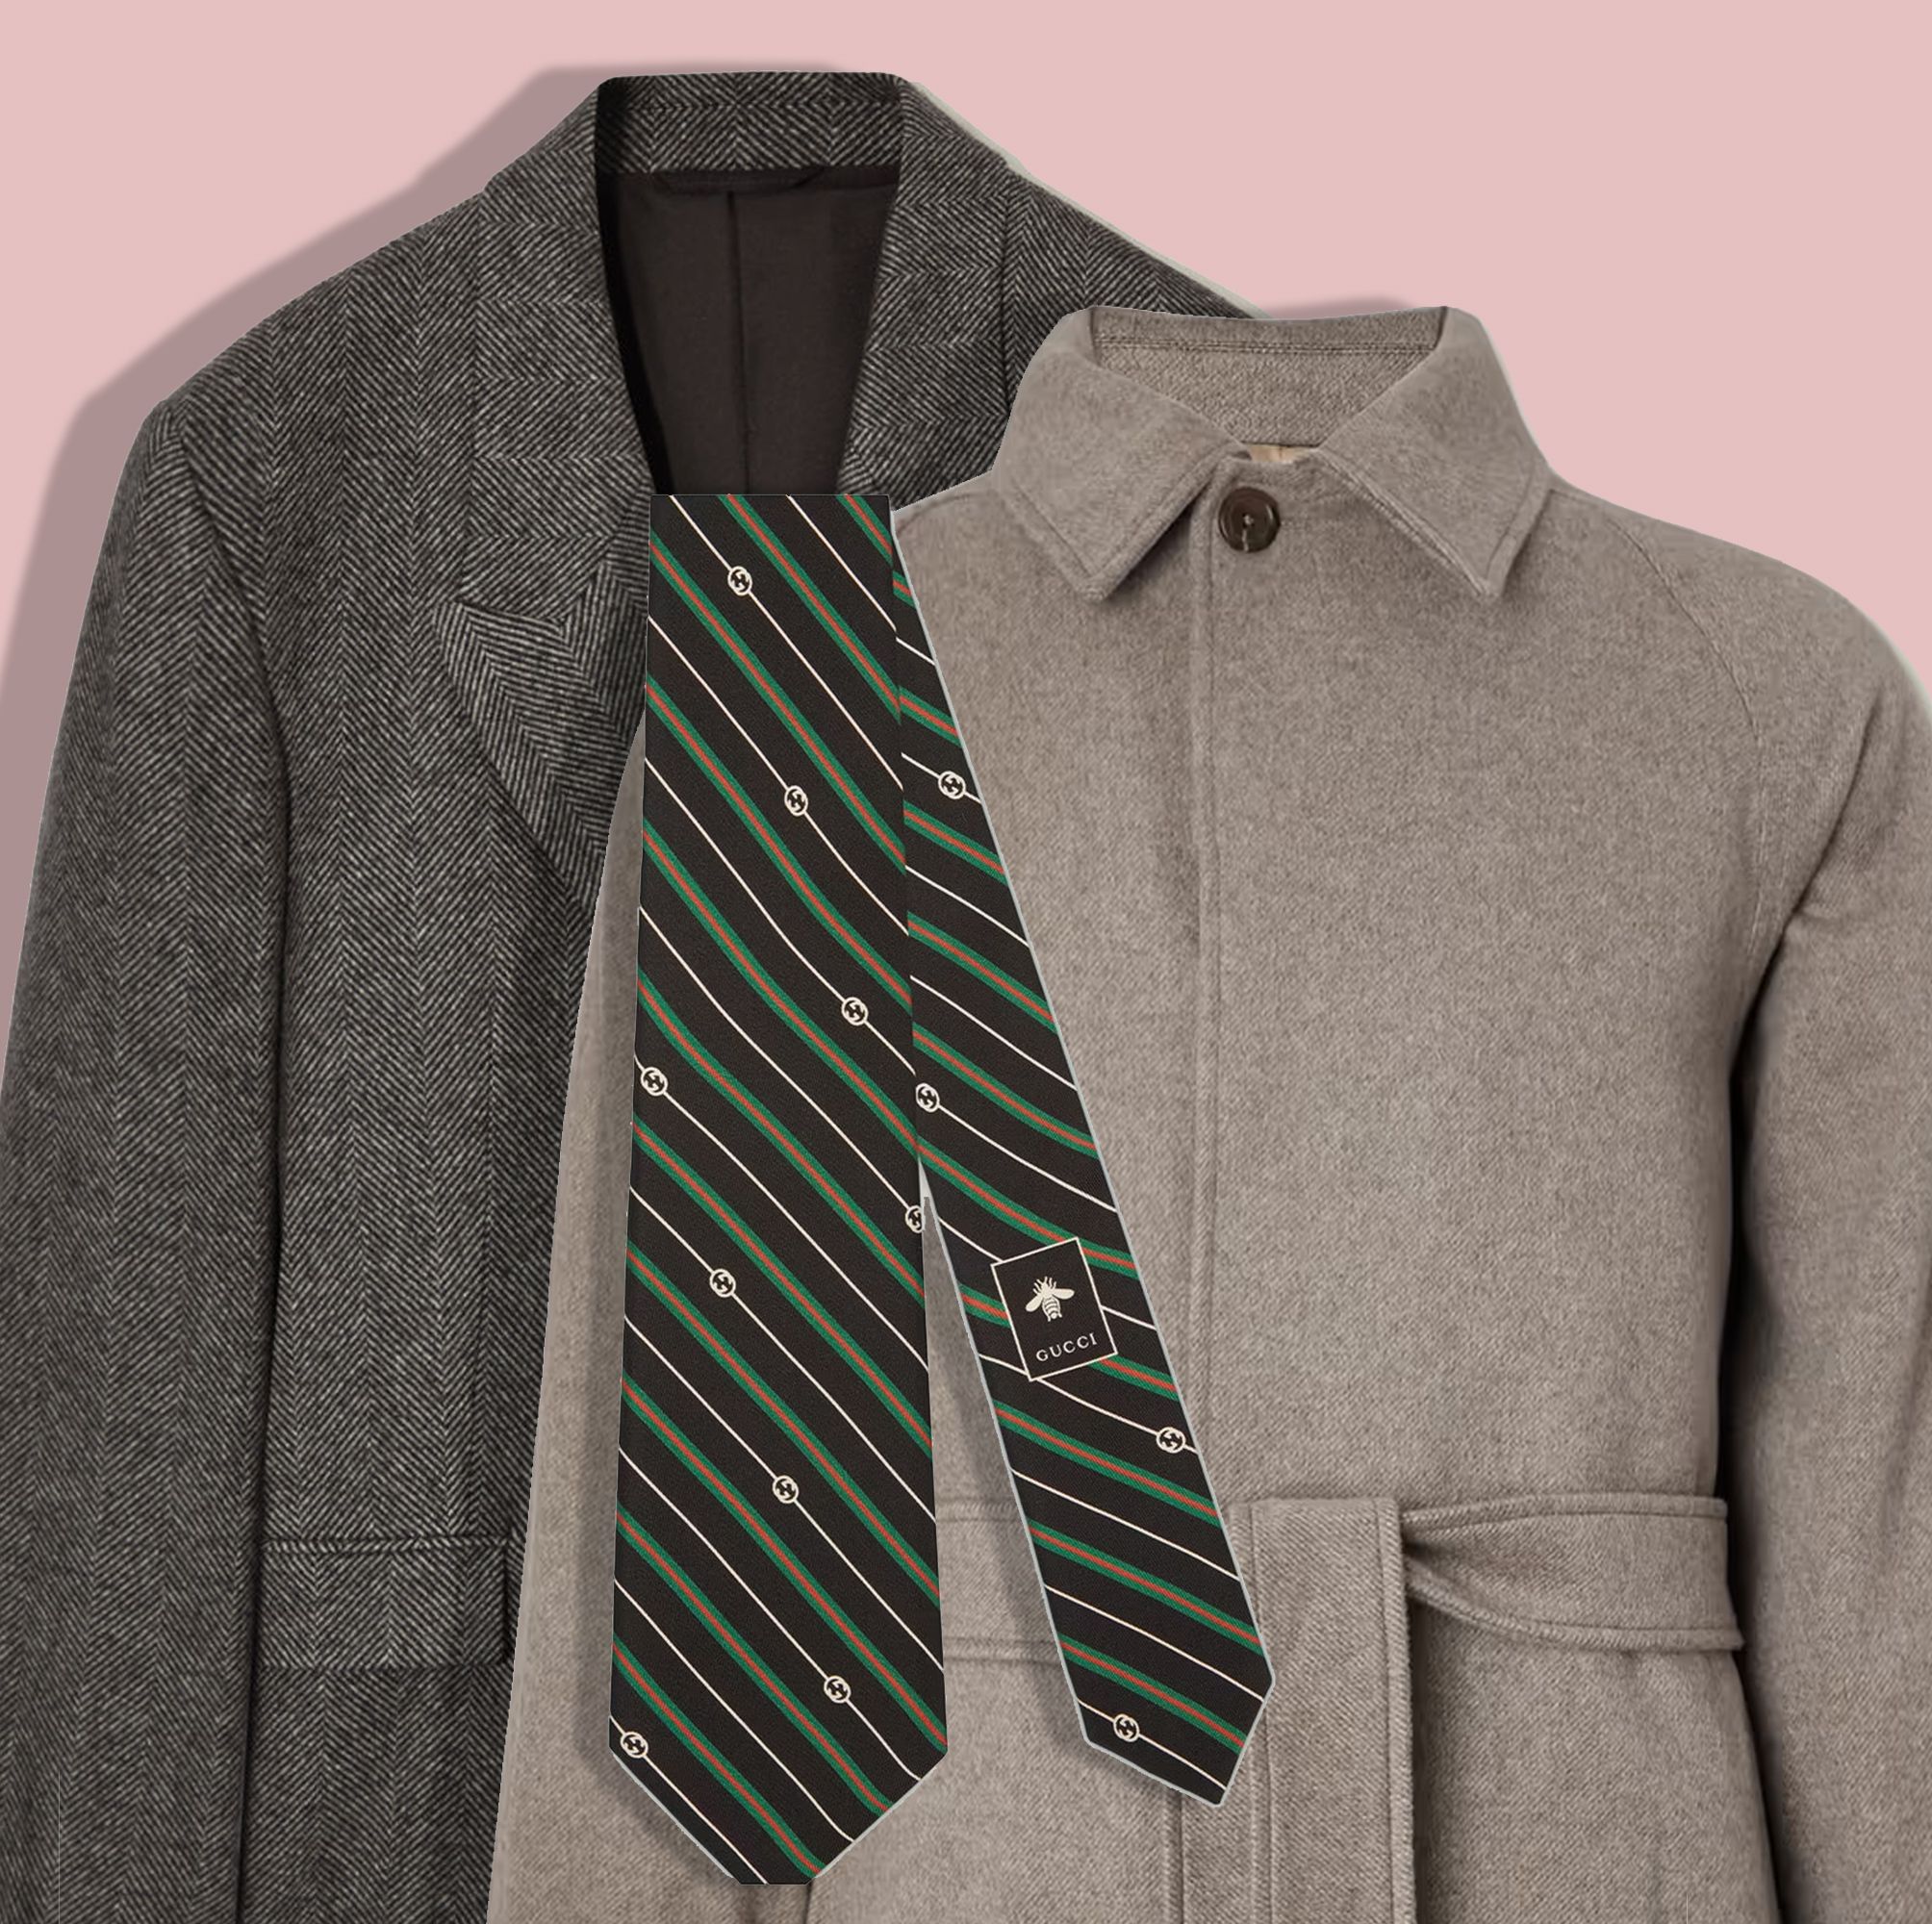 Esquire Editors' New Year's Style Resolutions